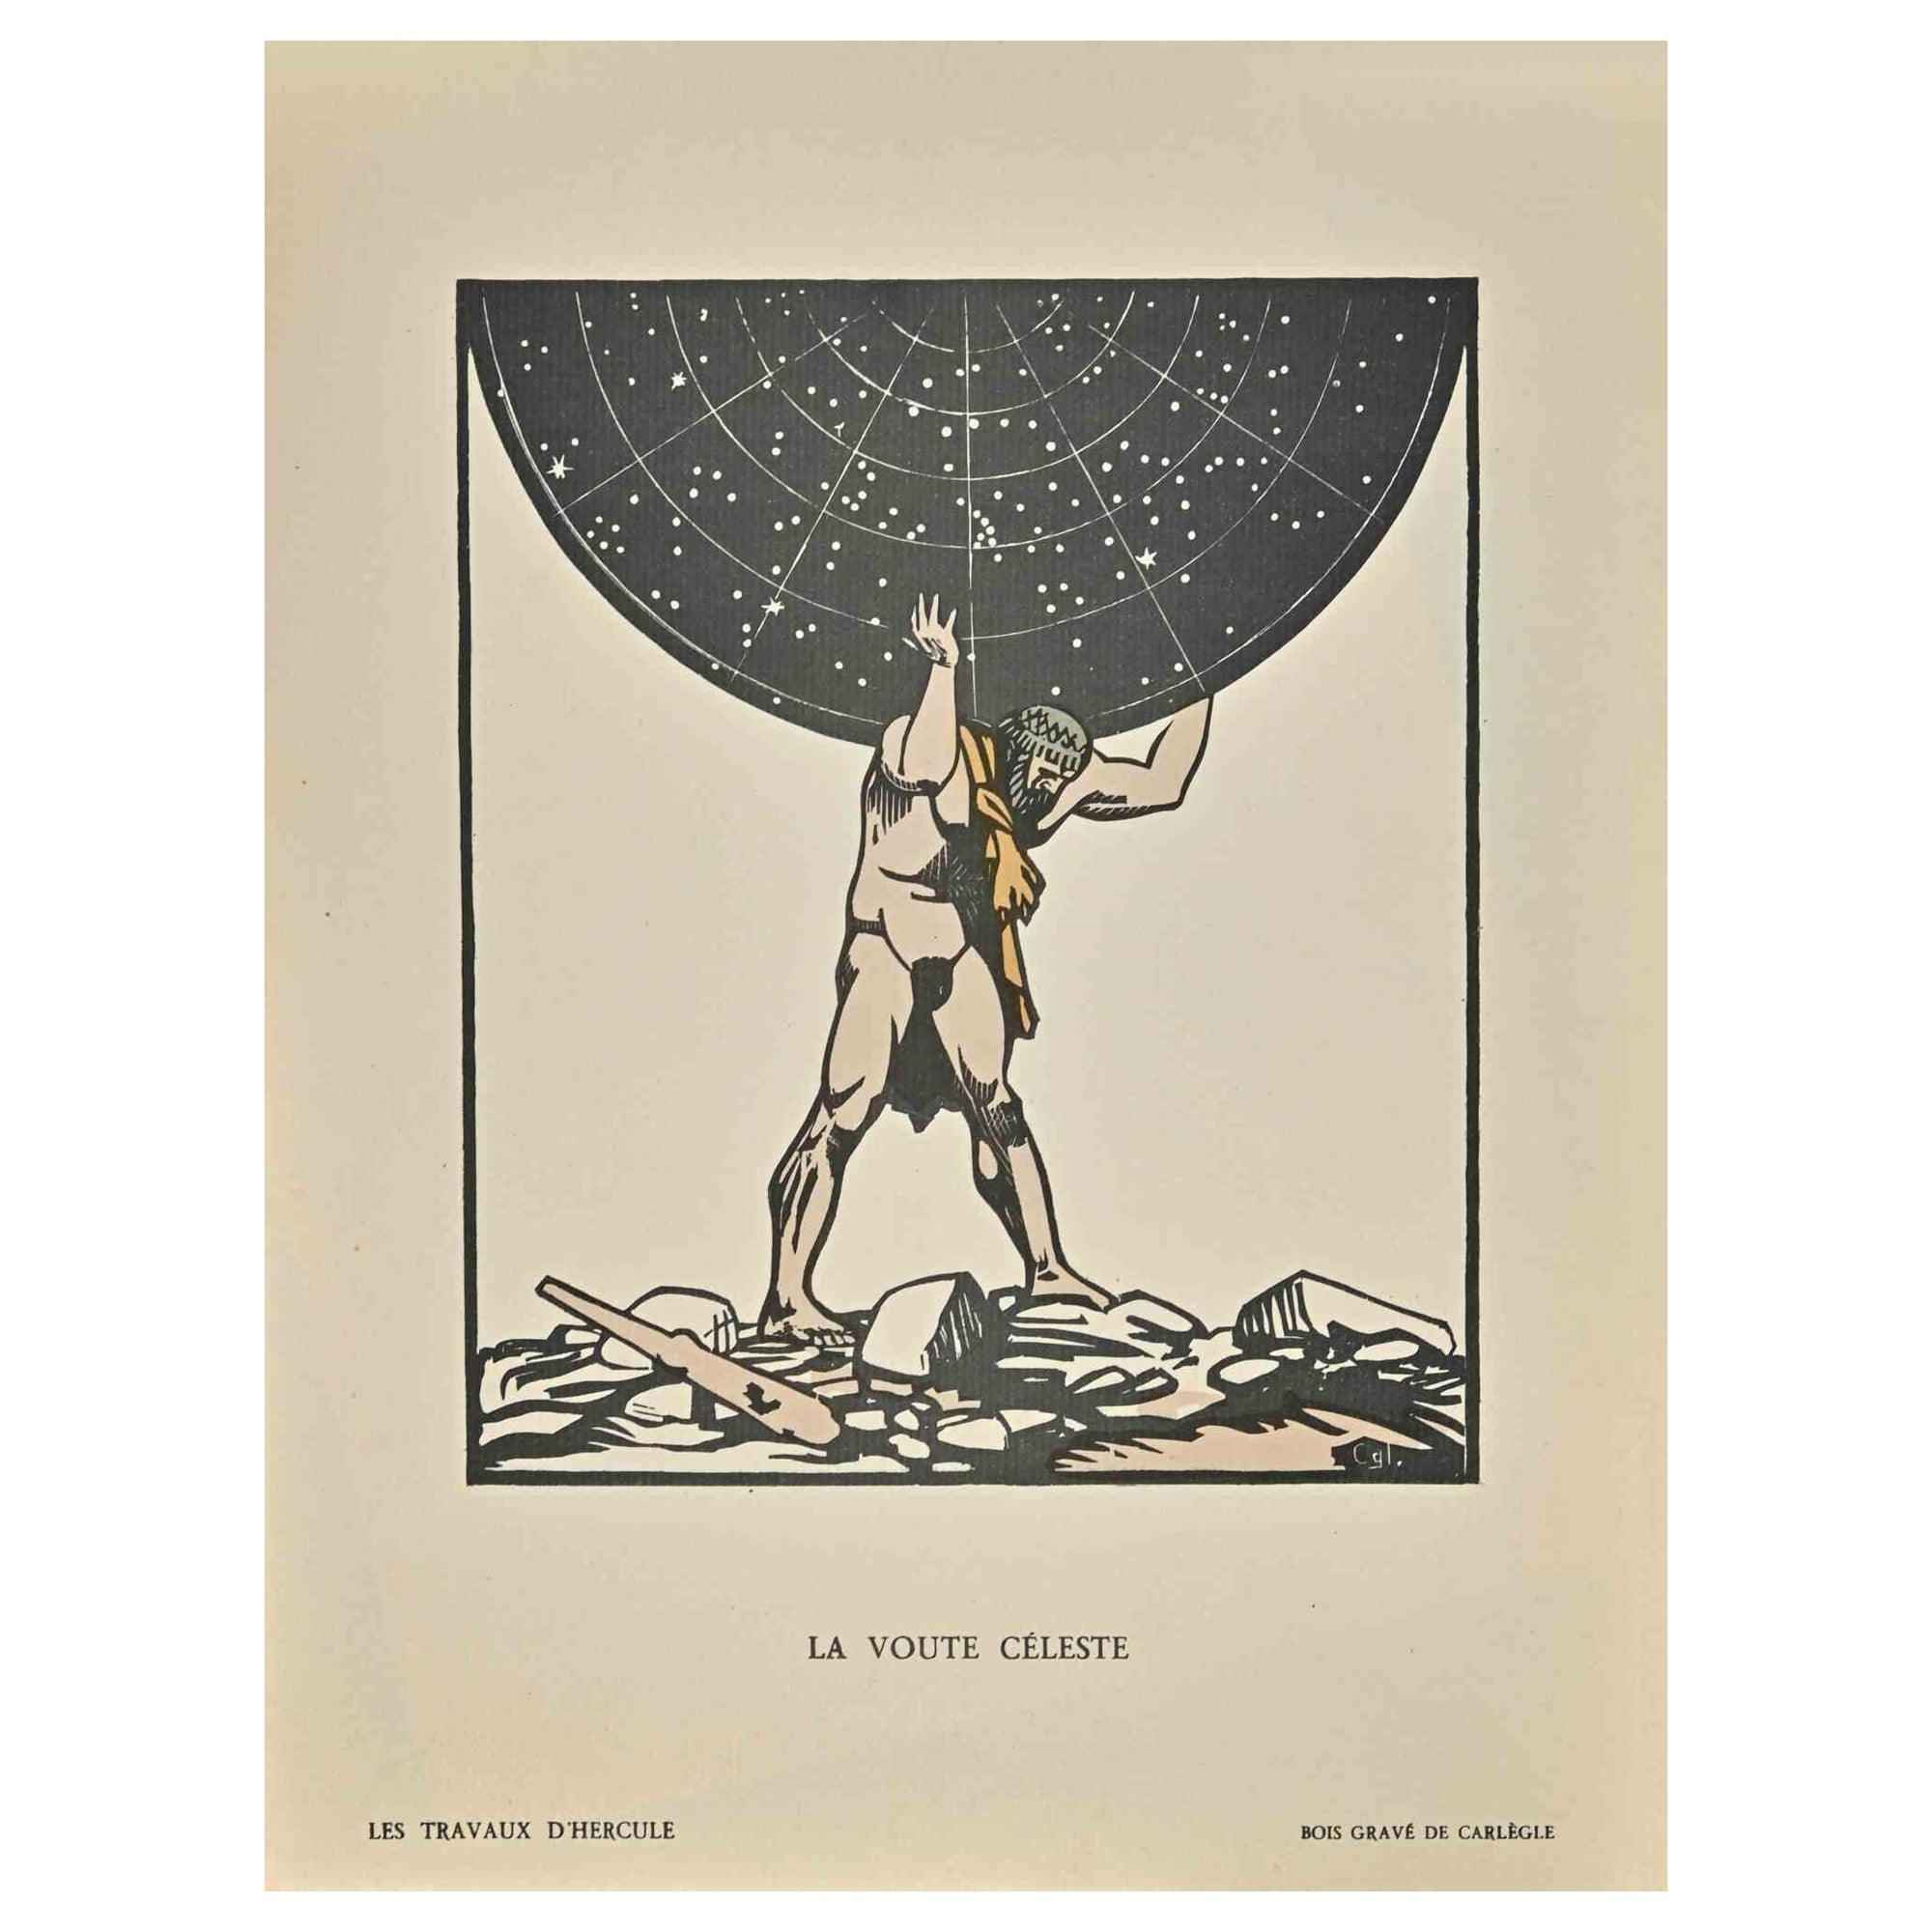 La Voute Celeste is an Original Color Woodcut Print realized by Carlègle (Charles Emile Egli, 30 March 1877 – 11 January 1937).

Belongs to the suite "Les Travaux D'Hercule".

Good condition on a yellowed cardboard.

Titled, Stamp Signed on the